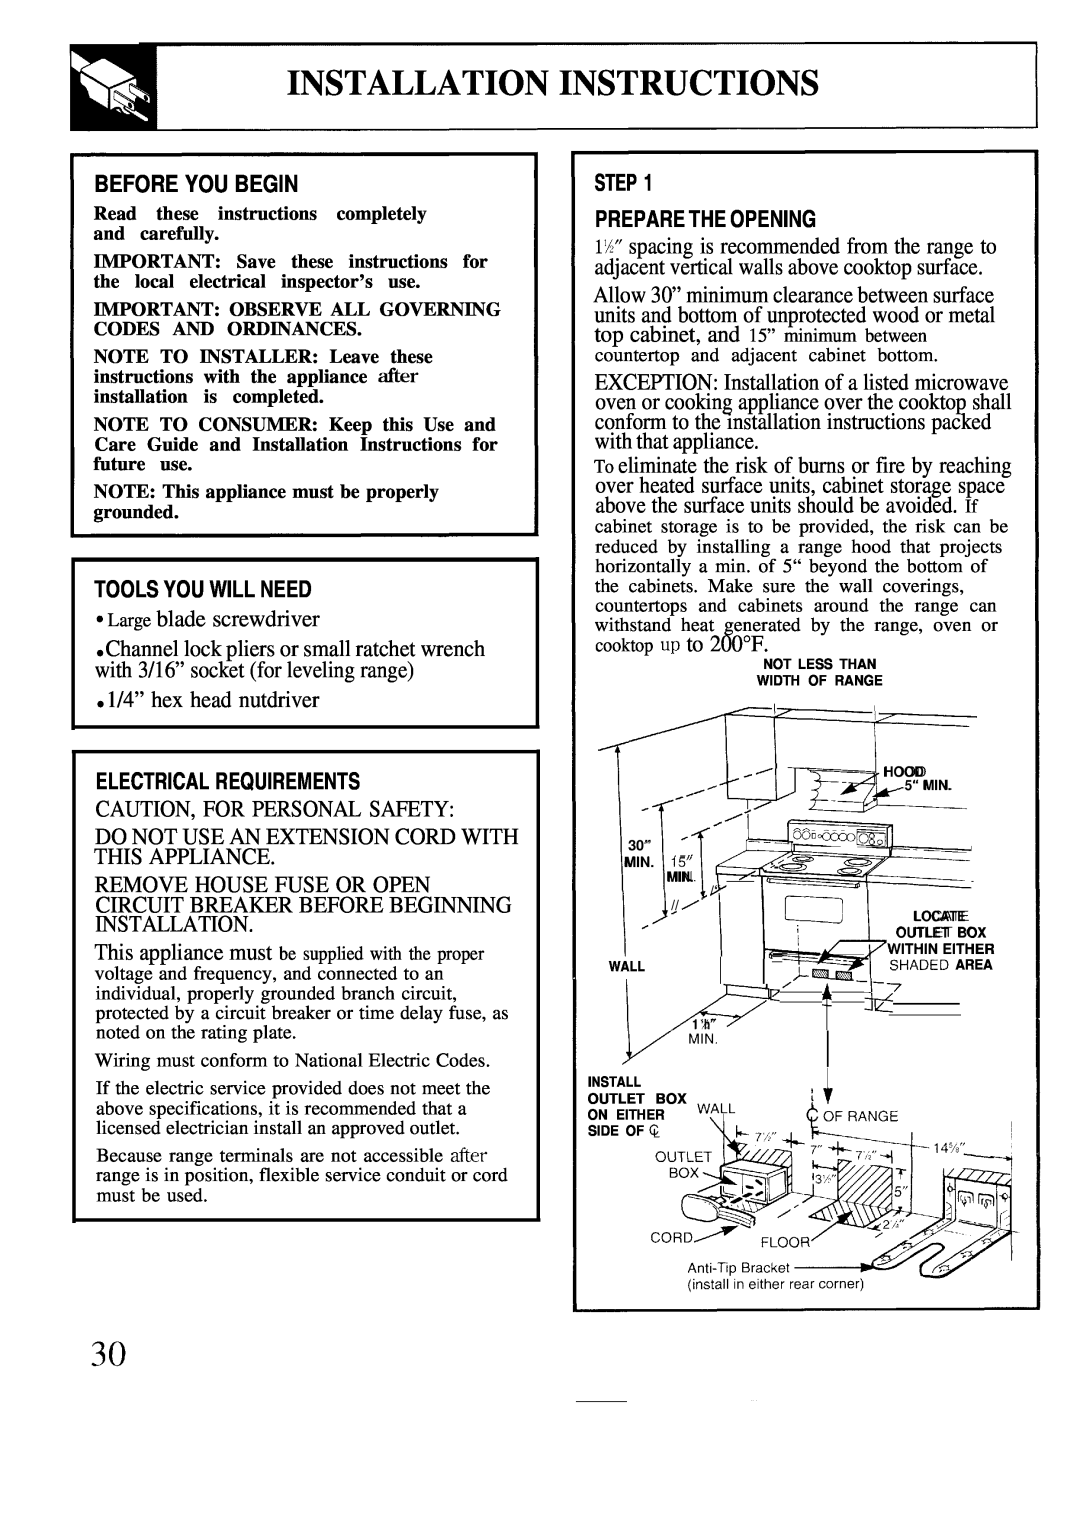 GE JBP19 Installation Instructions, Before You Begin, Tools You Will Need, Q Large blade screwdriver, cooktop UP to 200F 